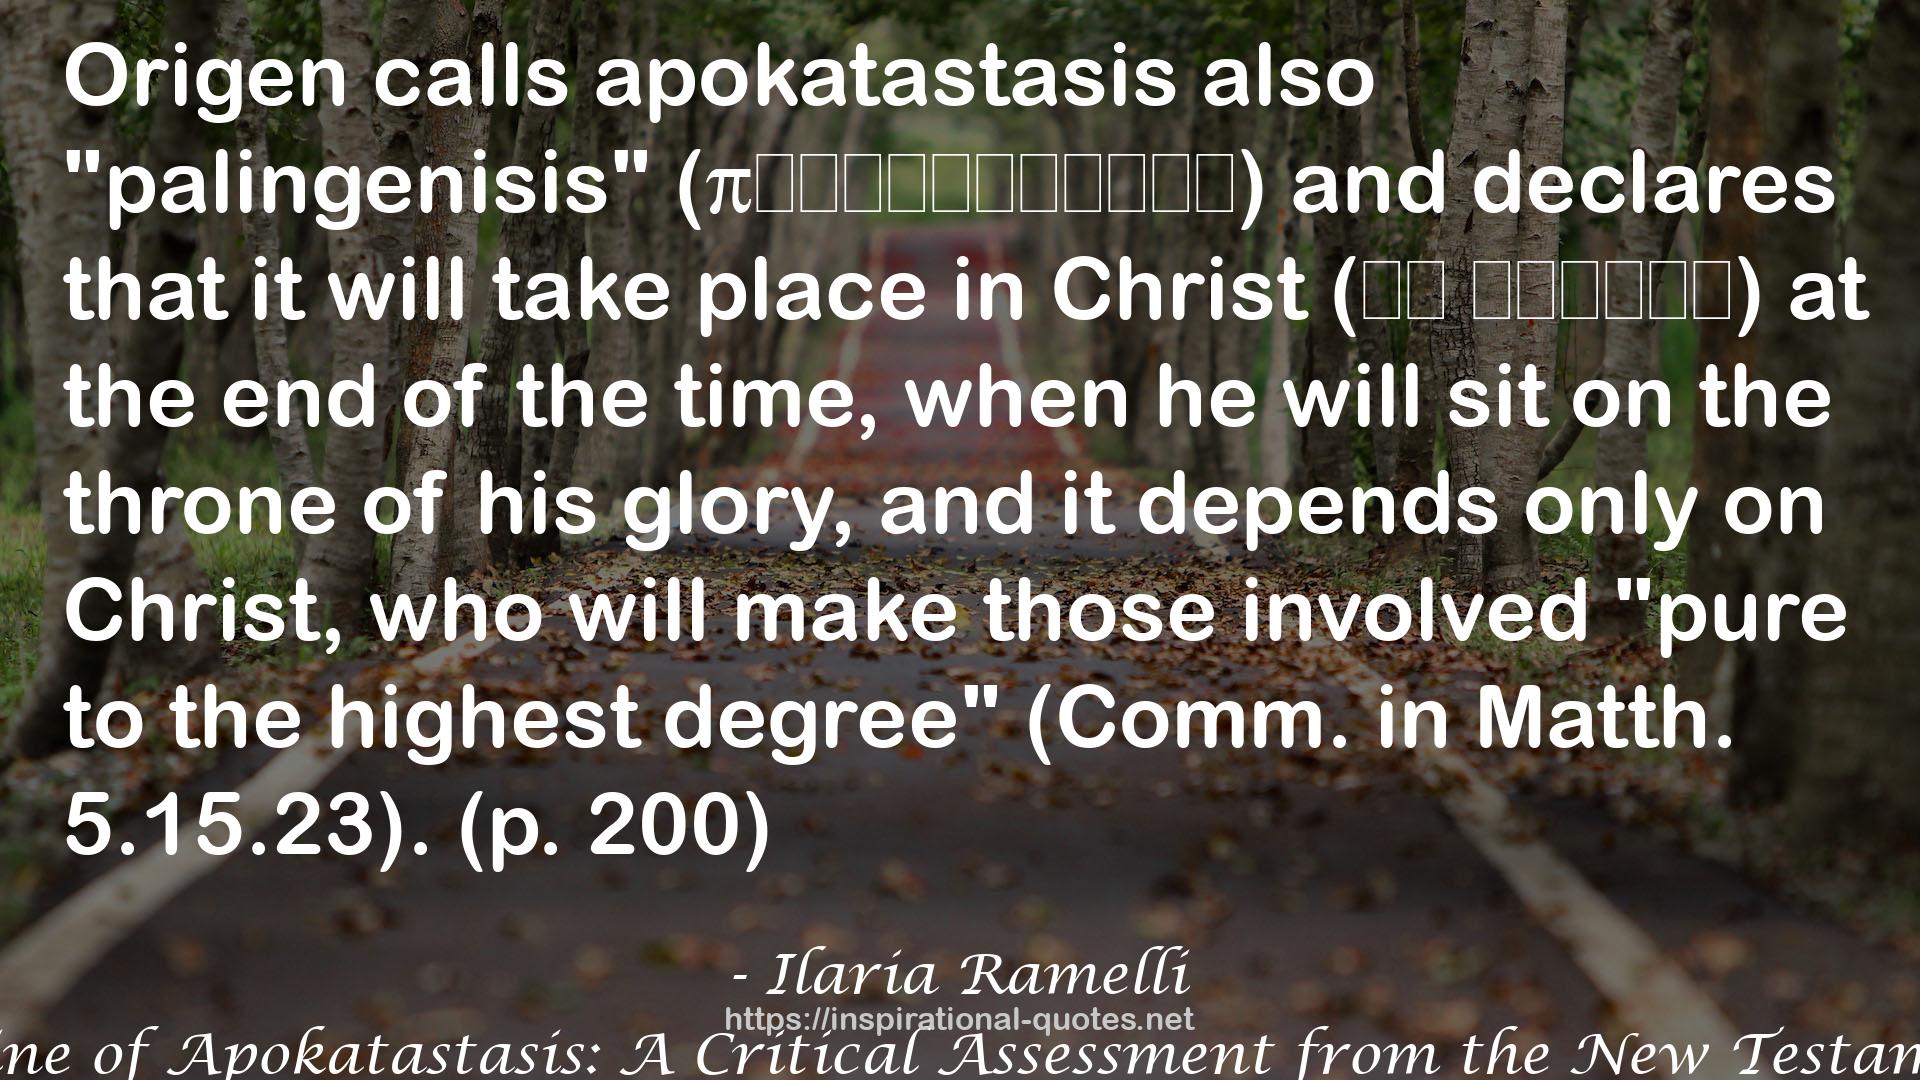 Christian Doctrine of Apokatastasis: A Critical Assessment from the New Testament to Eriugena QUOTES